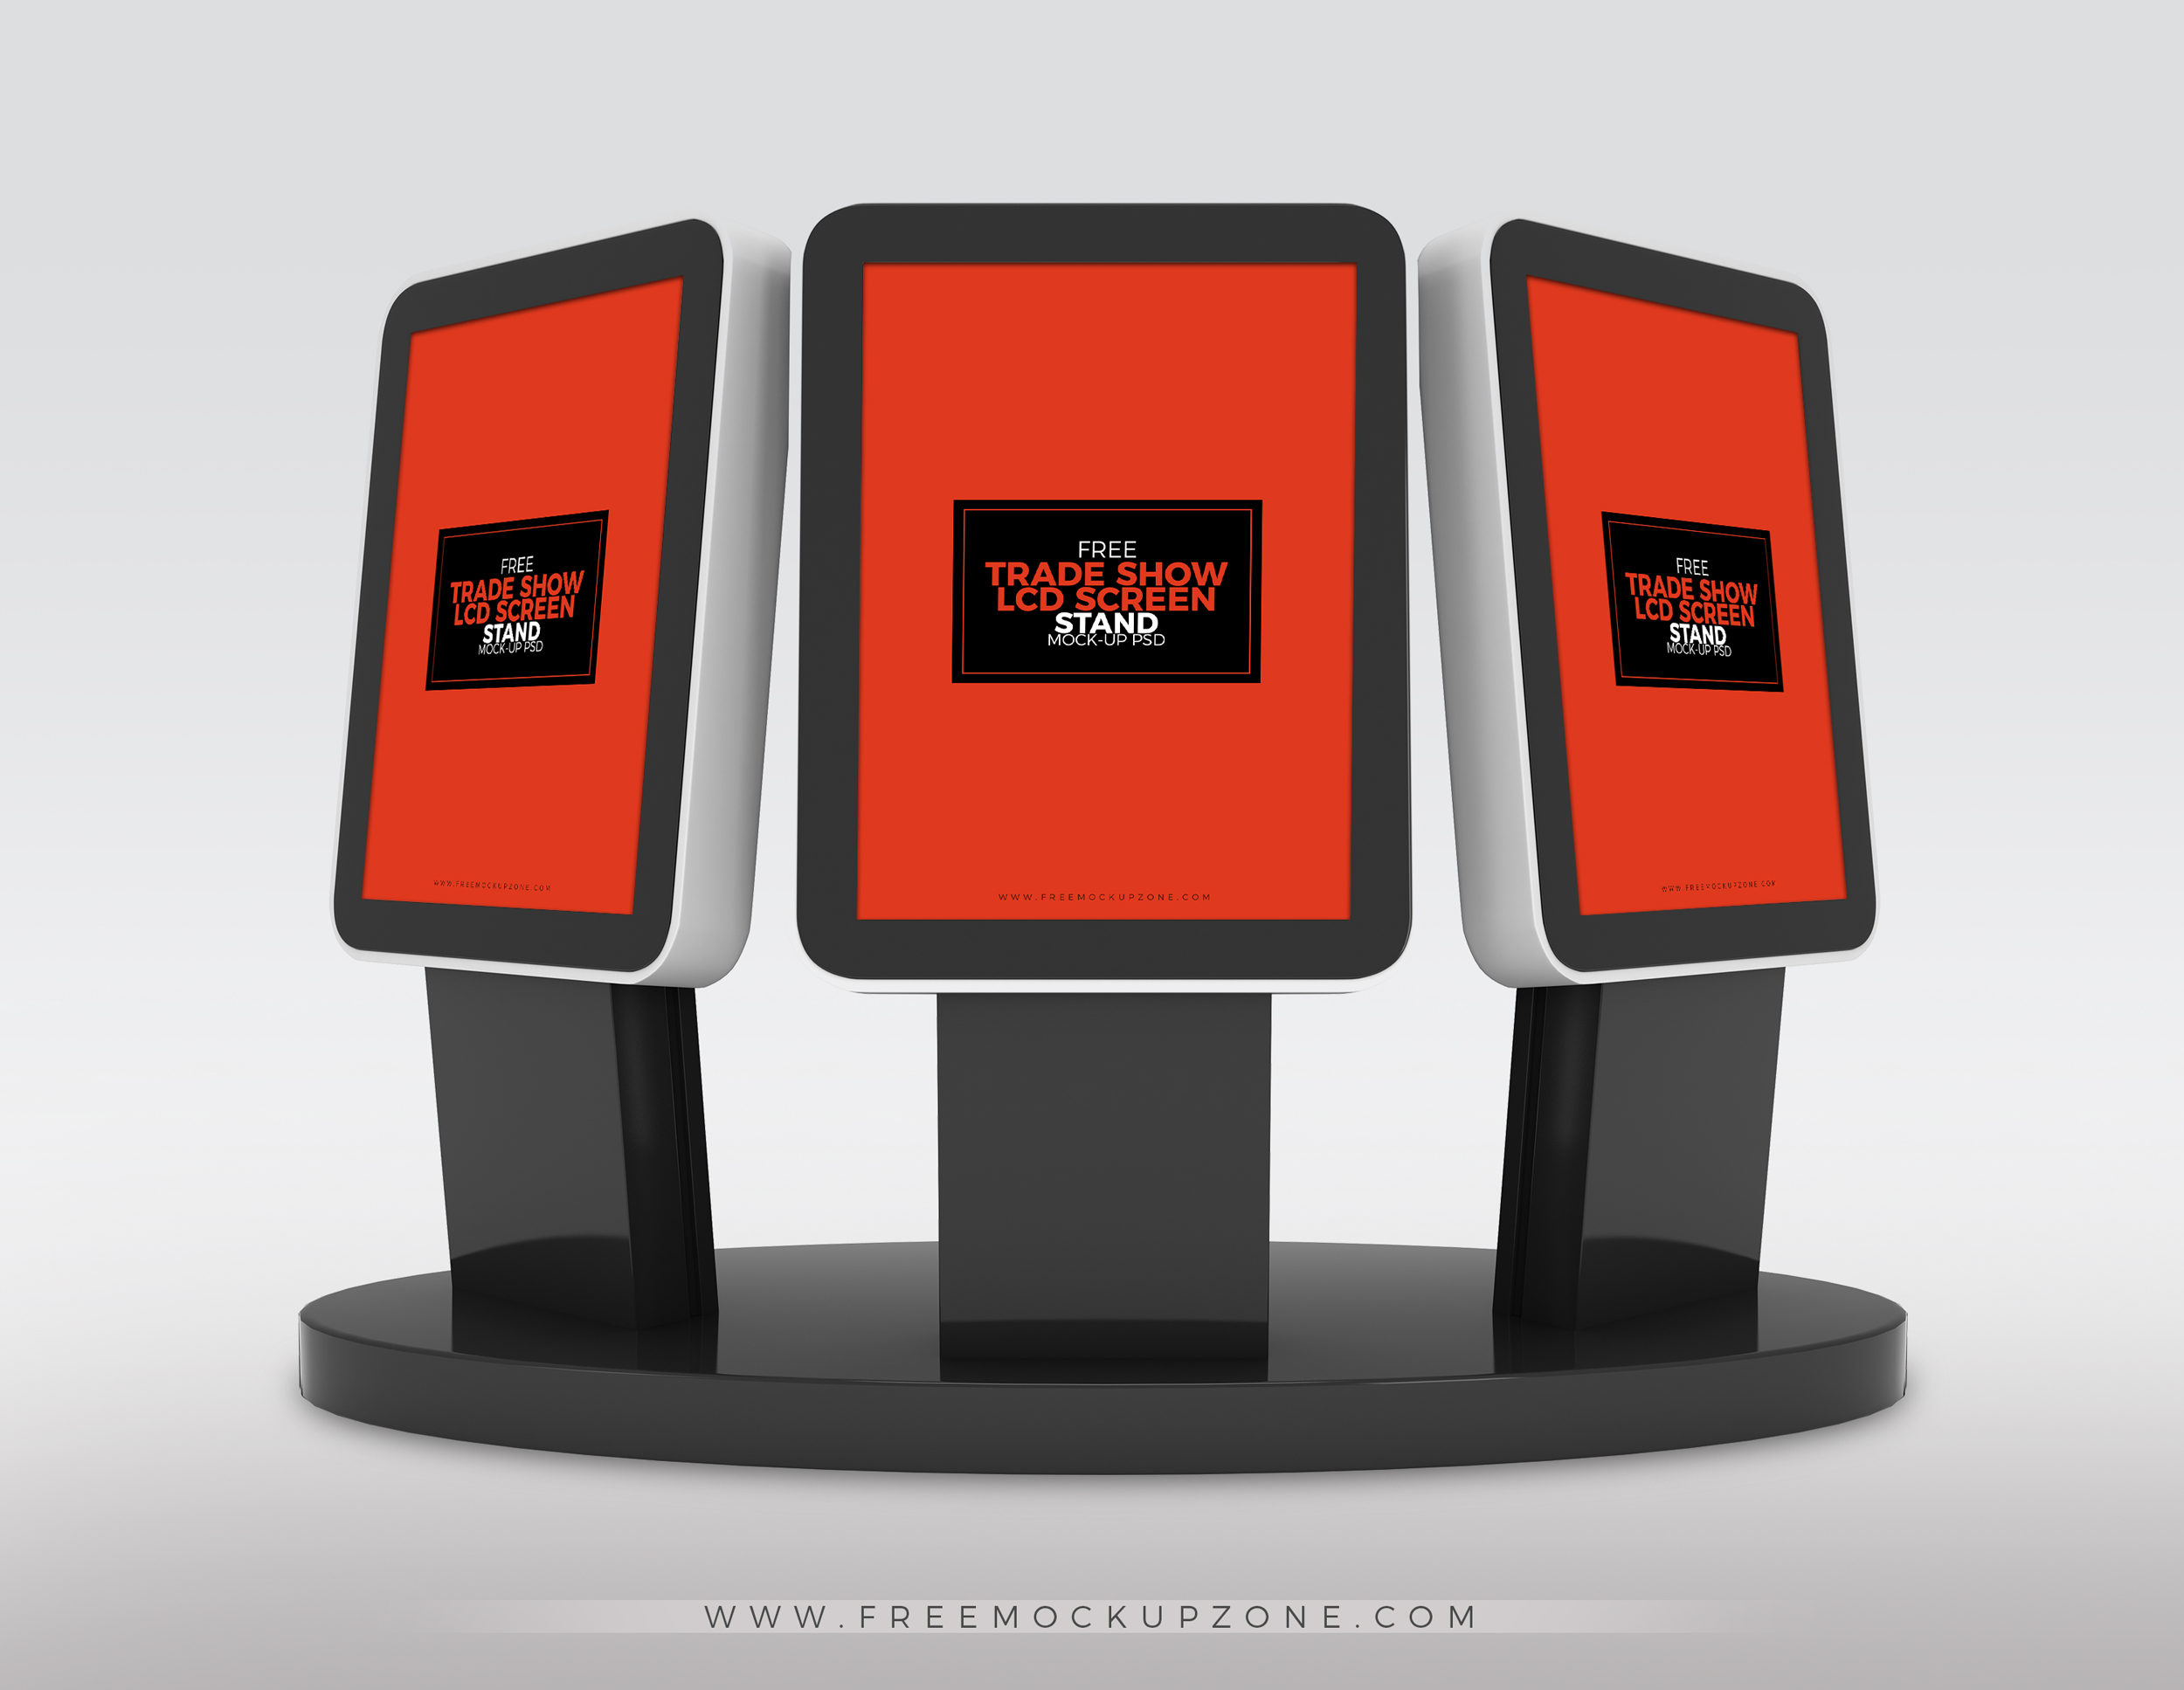 Download Free Trade Show Booth Lcd Screen Stands Mock Up Psdfree Mockup Zone Yellowimages Mockups